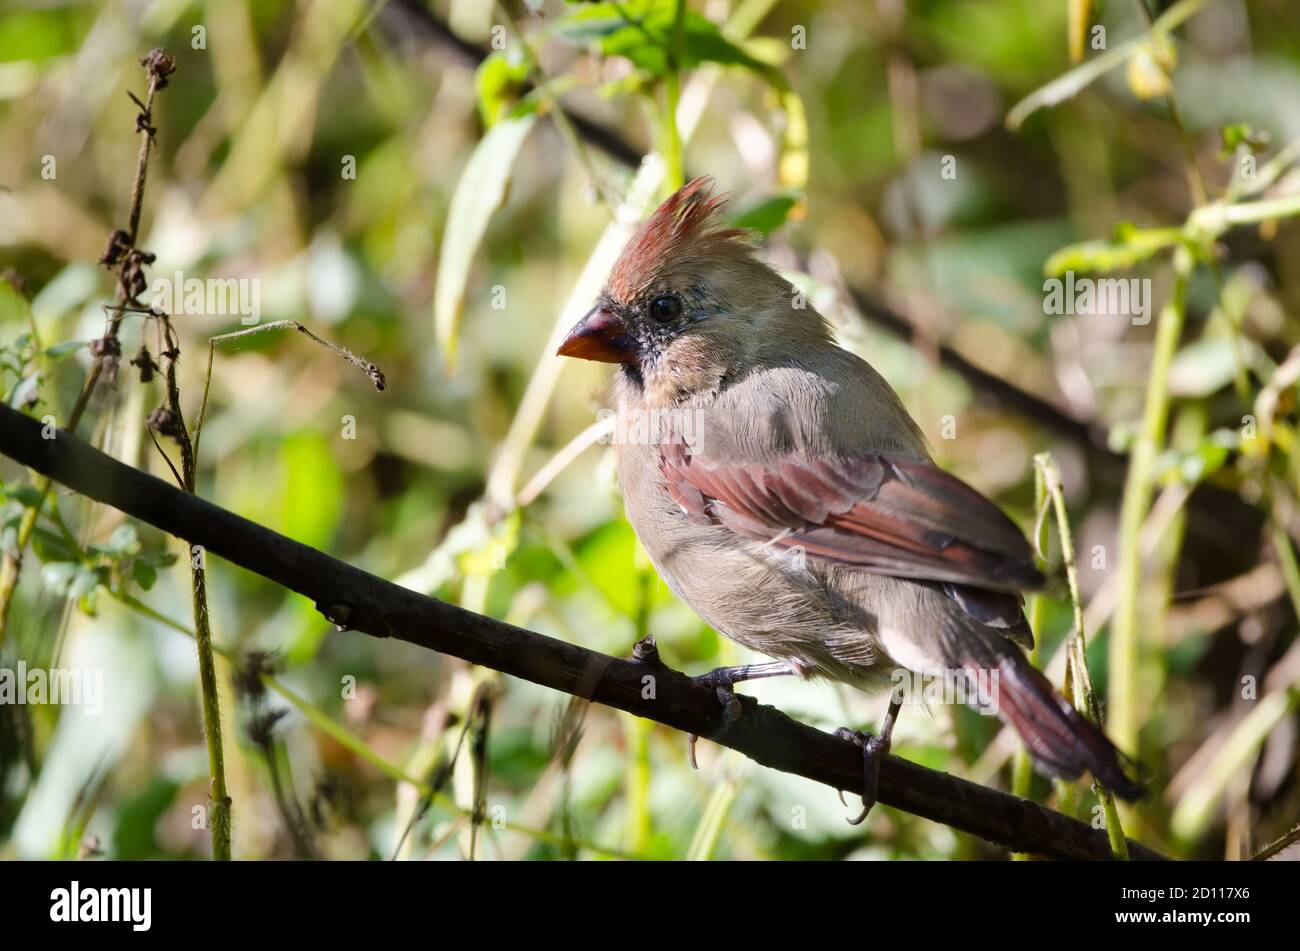 A female Northern Cardinal (Cardinalis cardinalis) This mid-sized songbird is commonly found in woodlands and gardens in eastern North America. Stock Photo